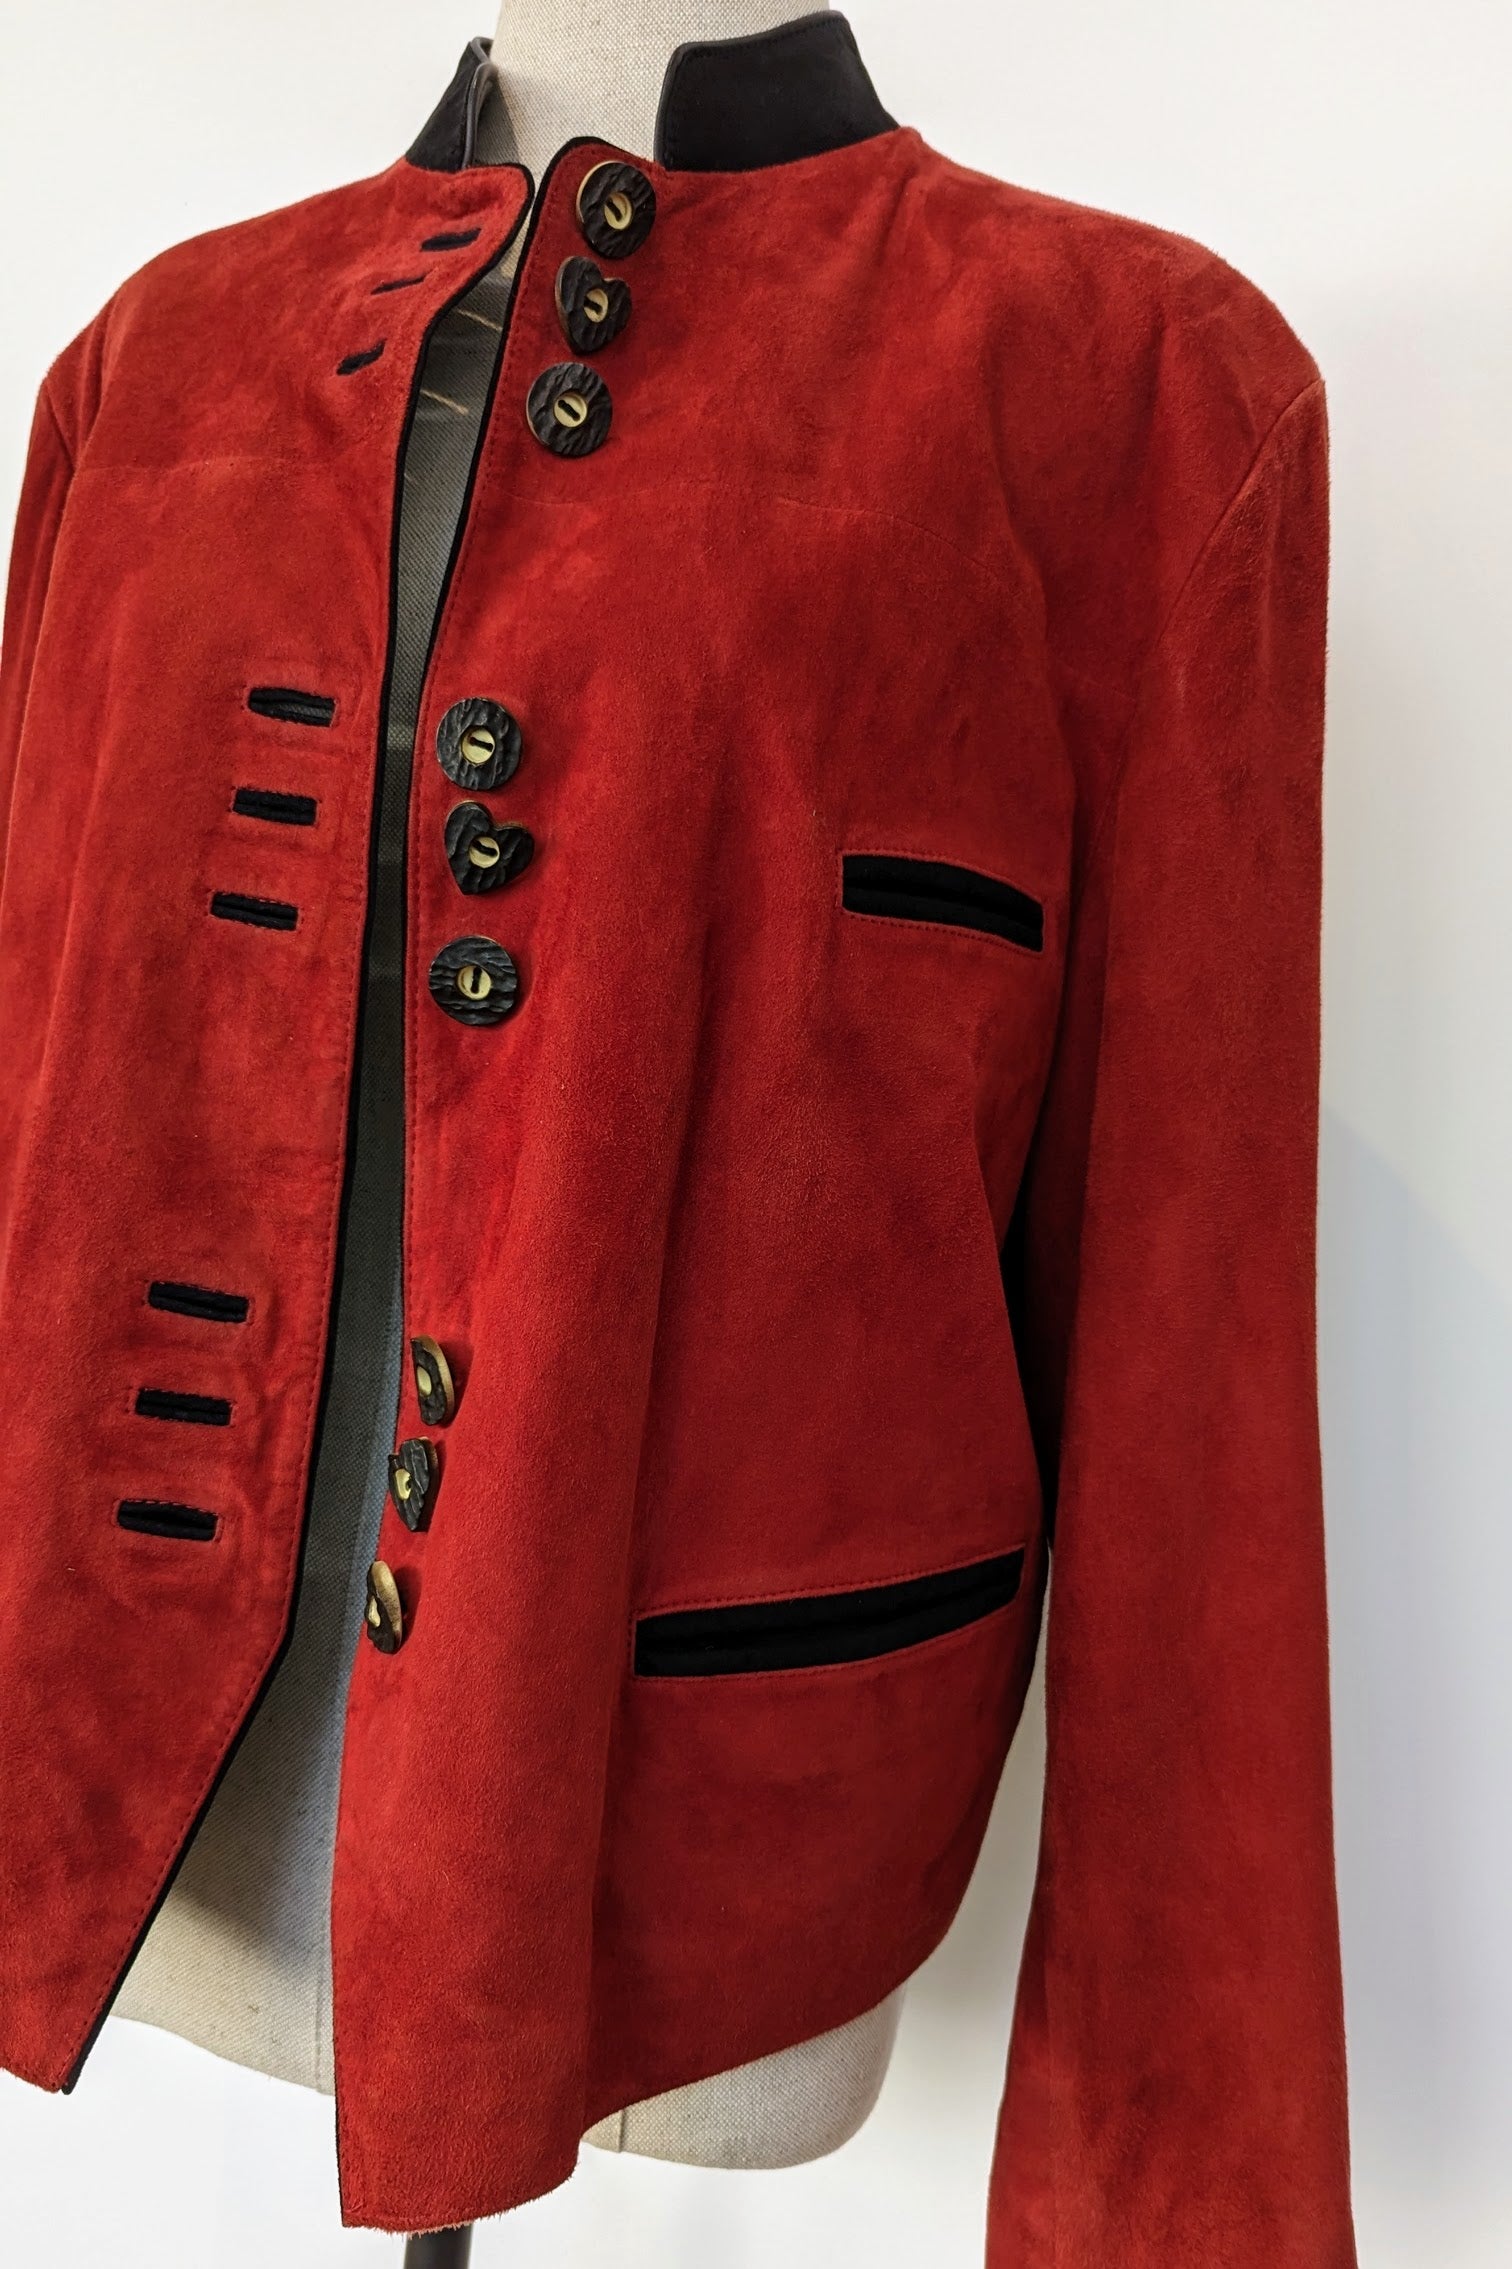 red suede jacket with black trim